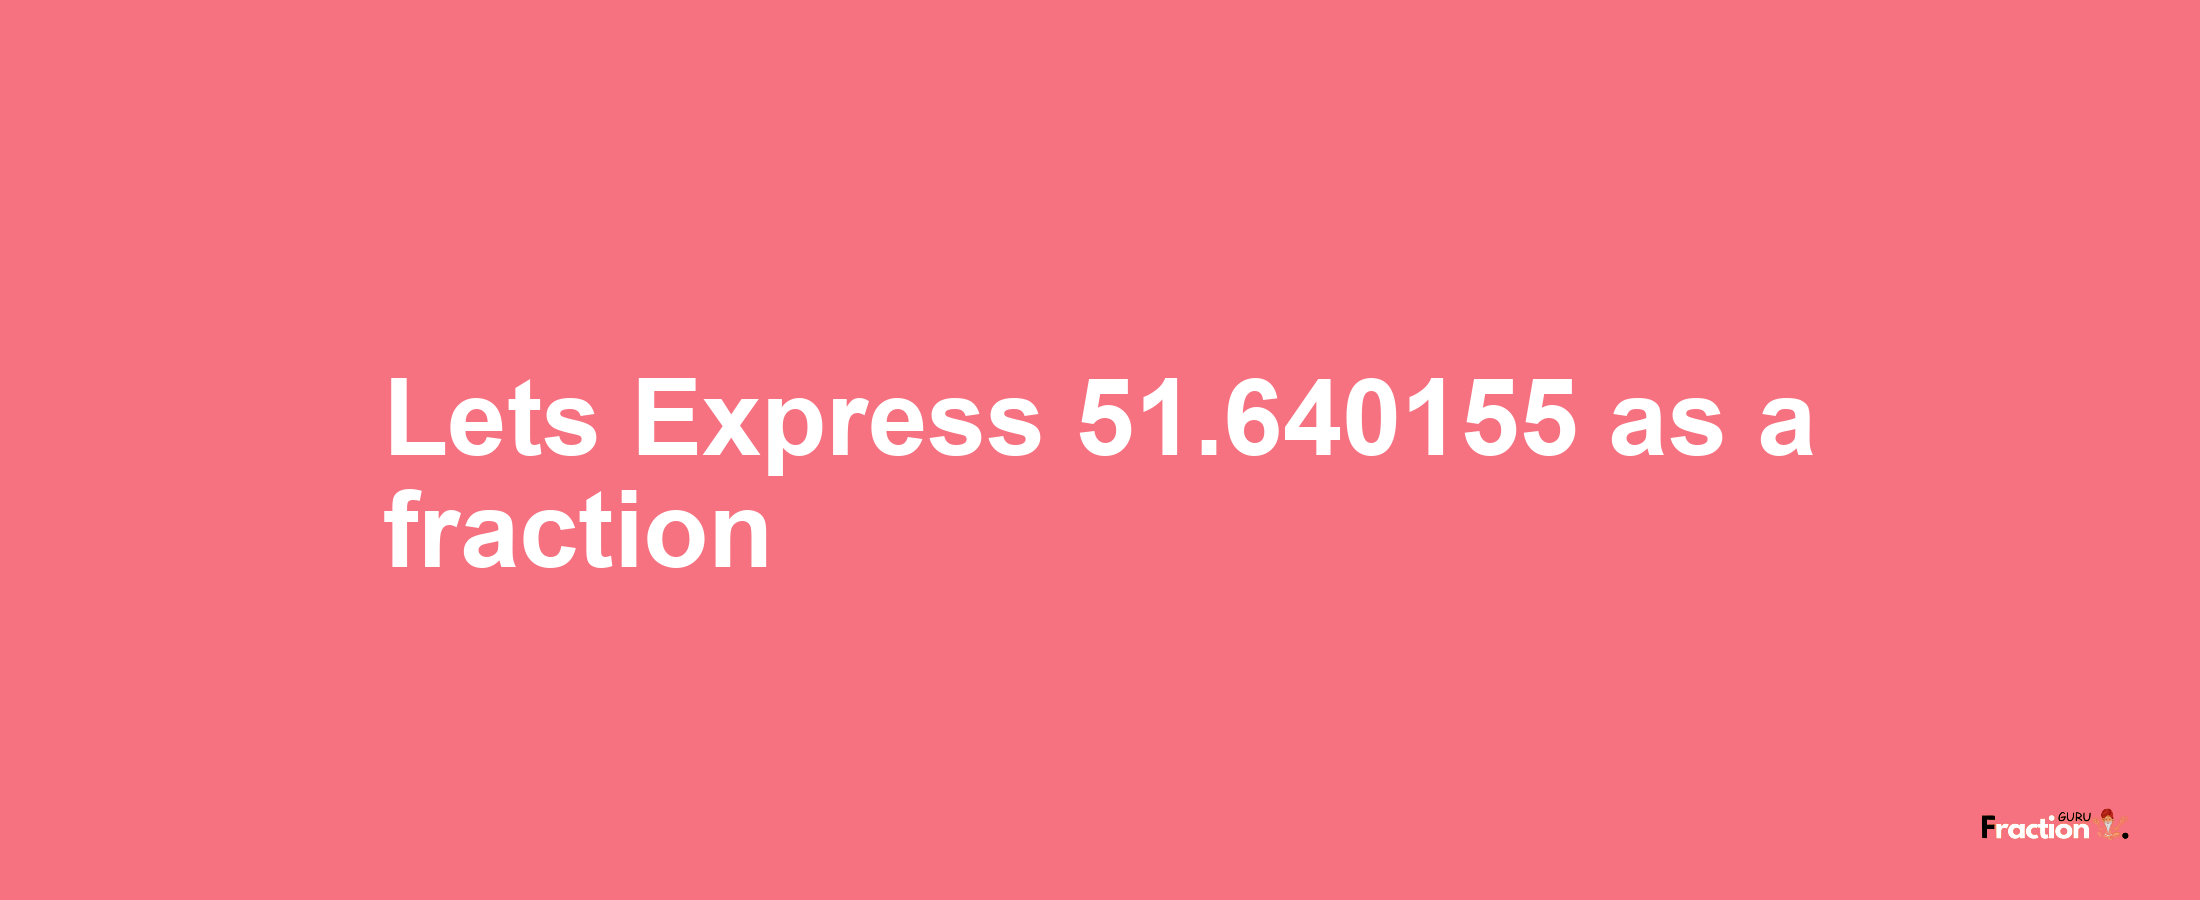 Lets Express 51.640155 as afraction